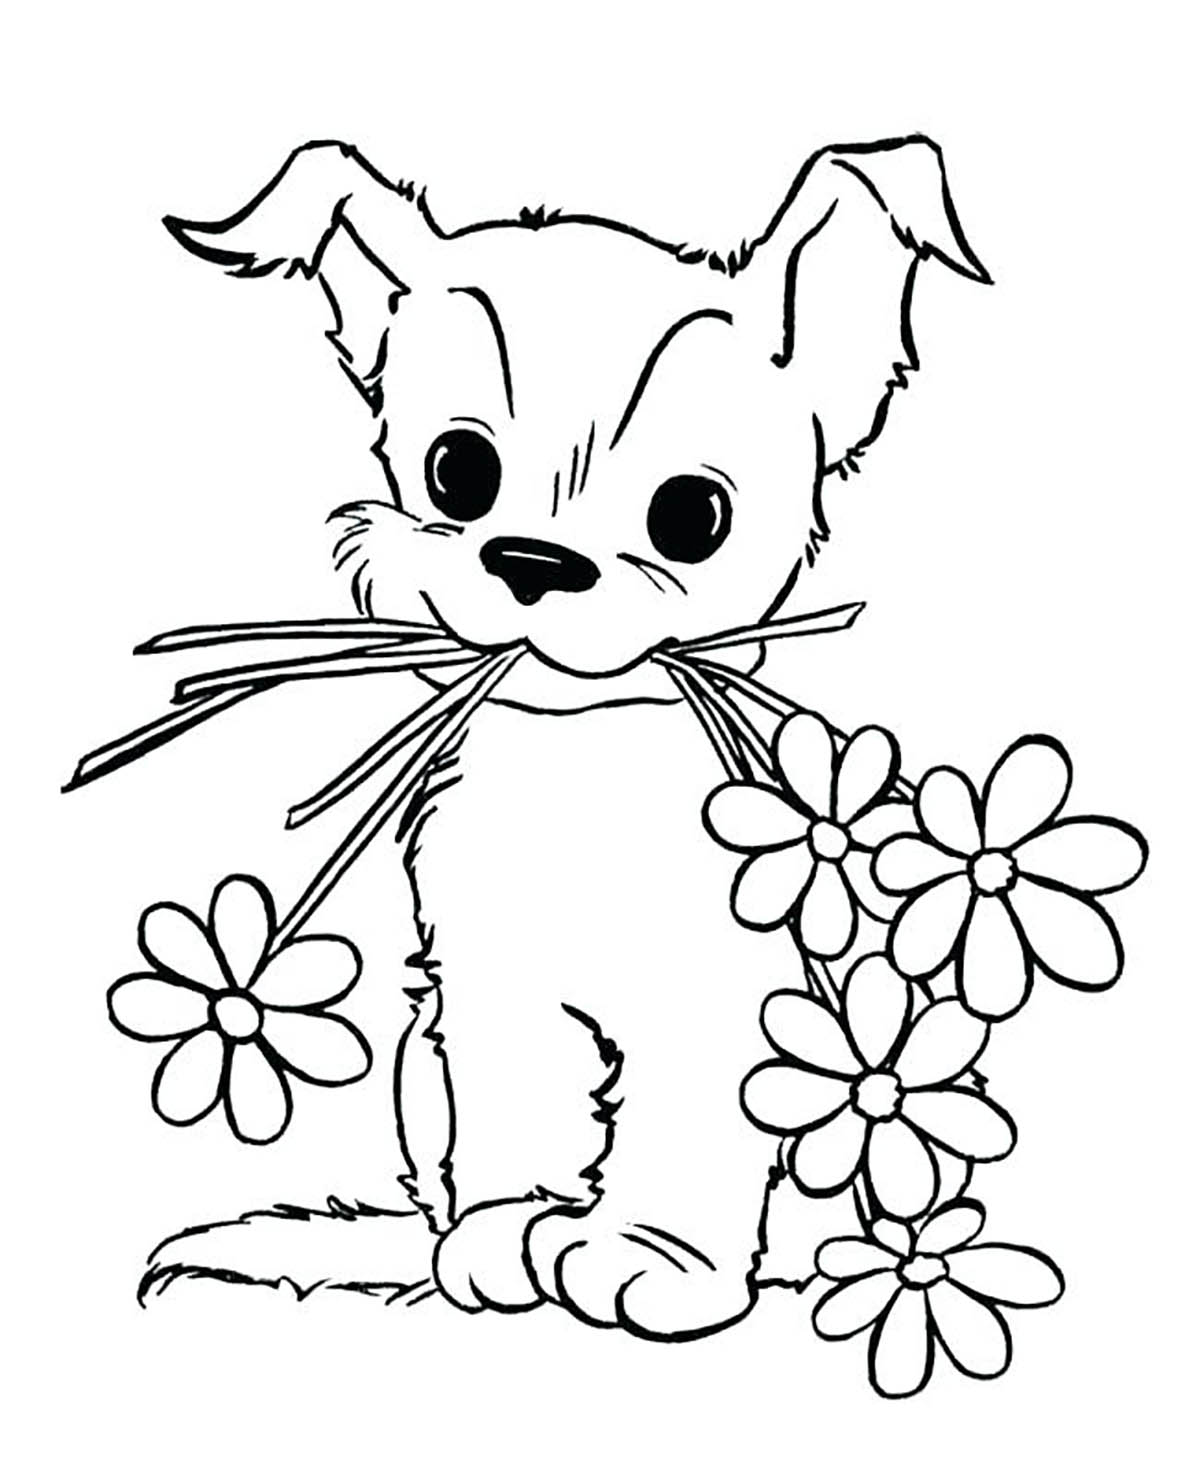 Coloring Pages of Cute Dogs Cute dog coloring pages to download and ...